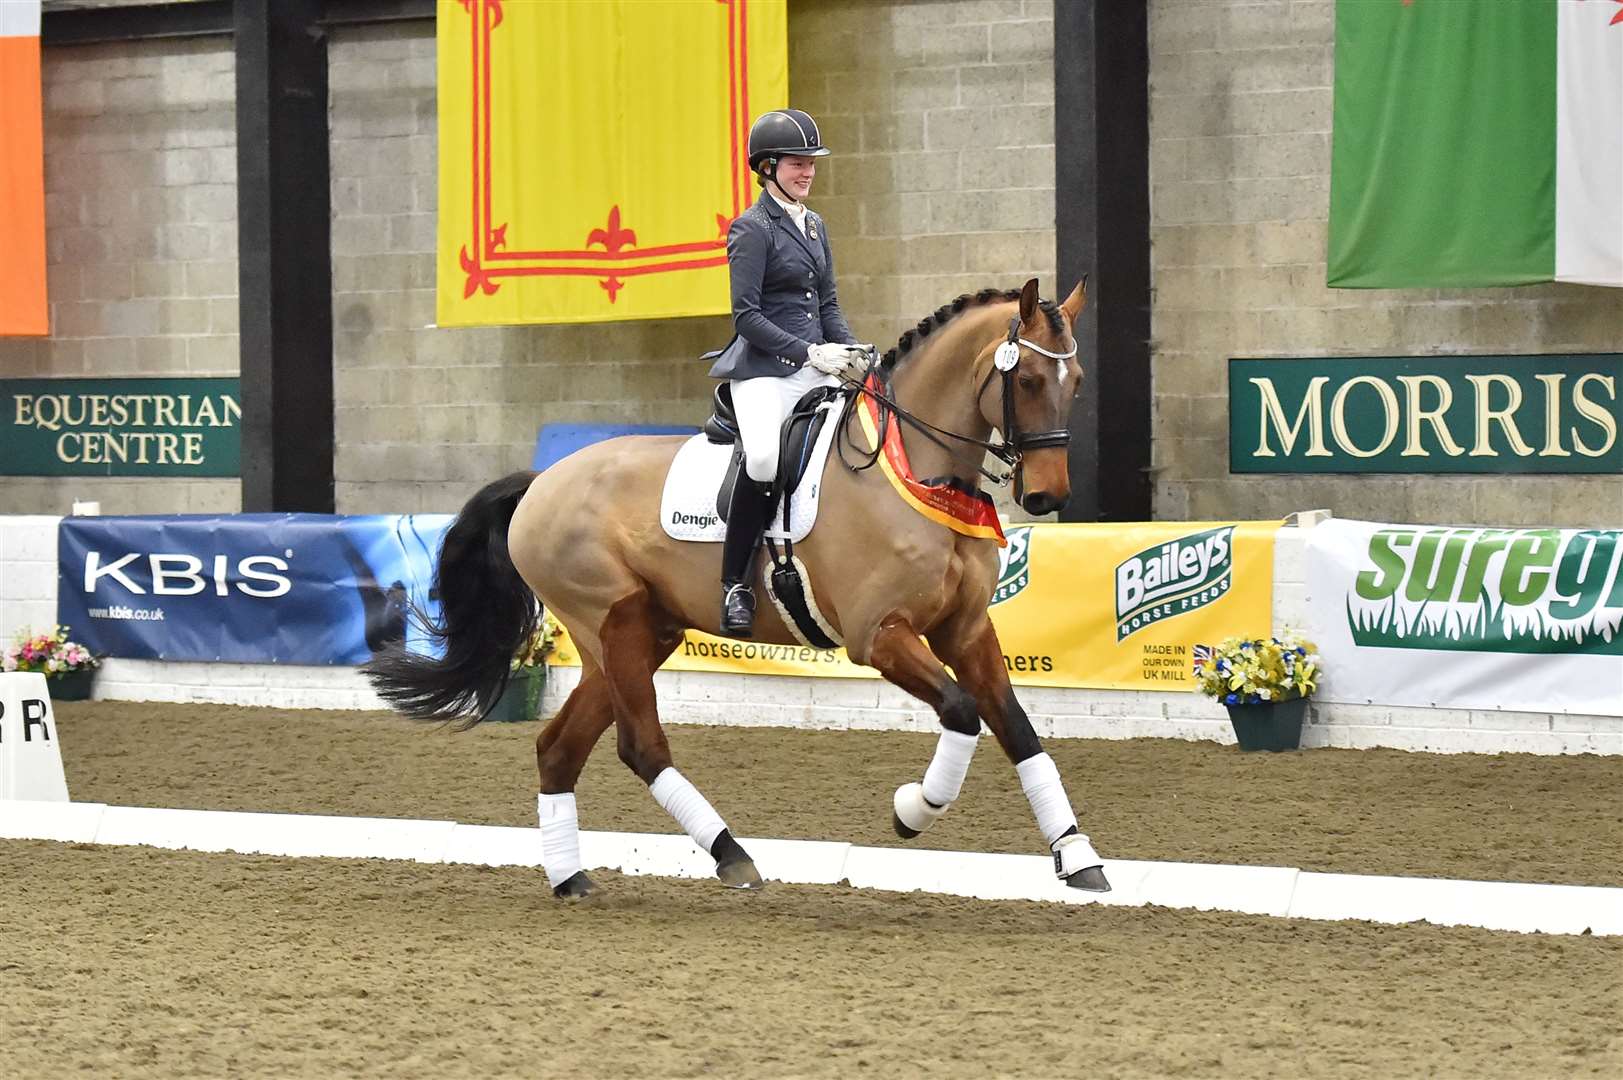 Matilda Haley and her dressage horse, Go hope to make it into the under 21 British squad